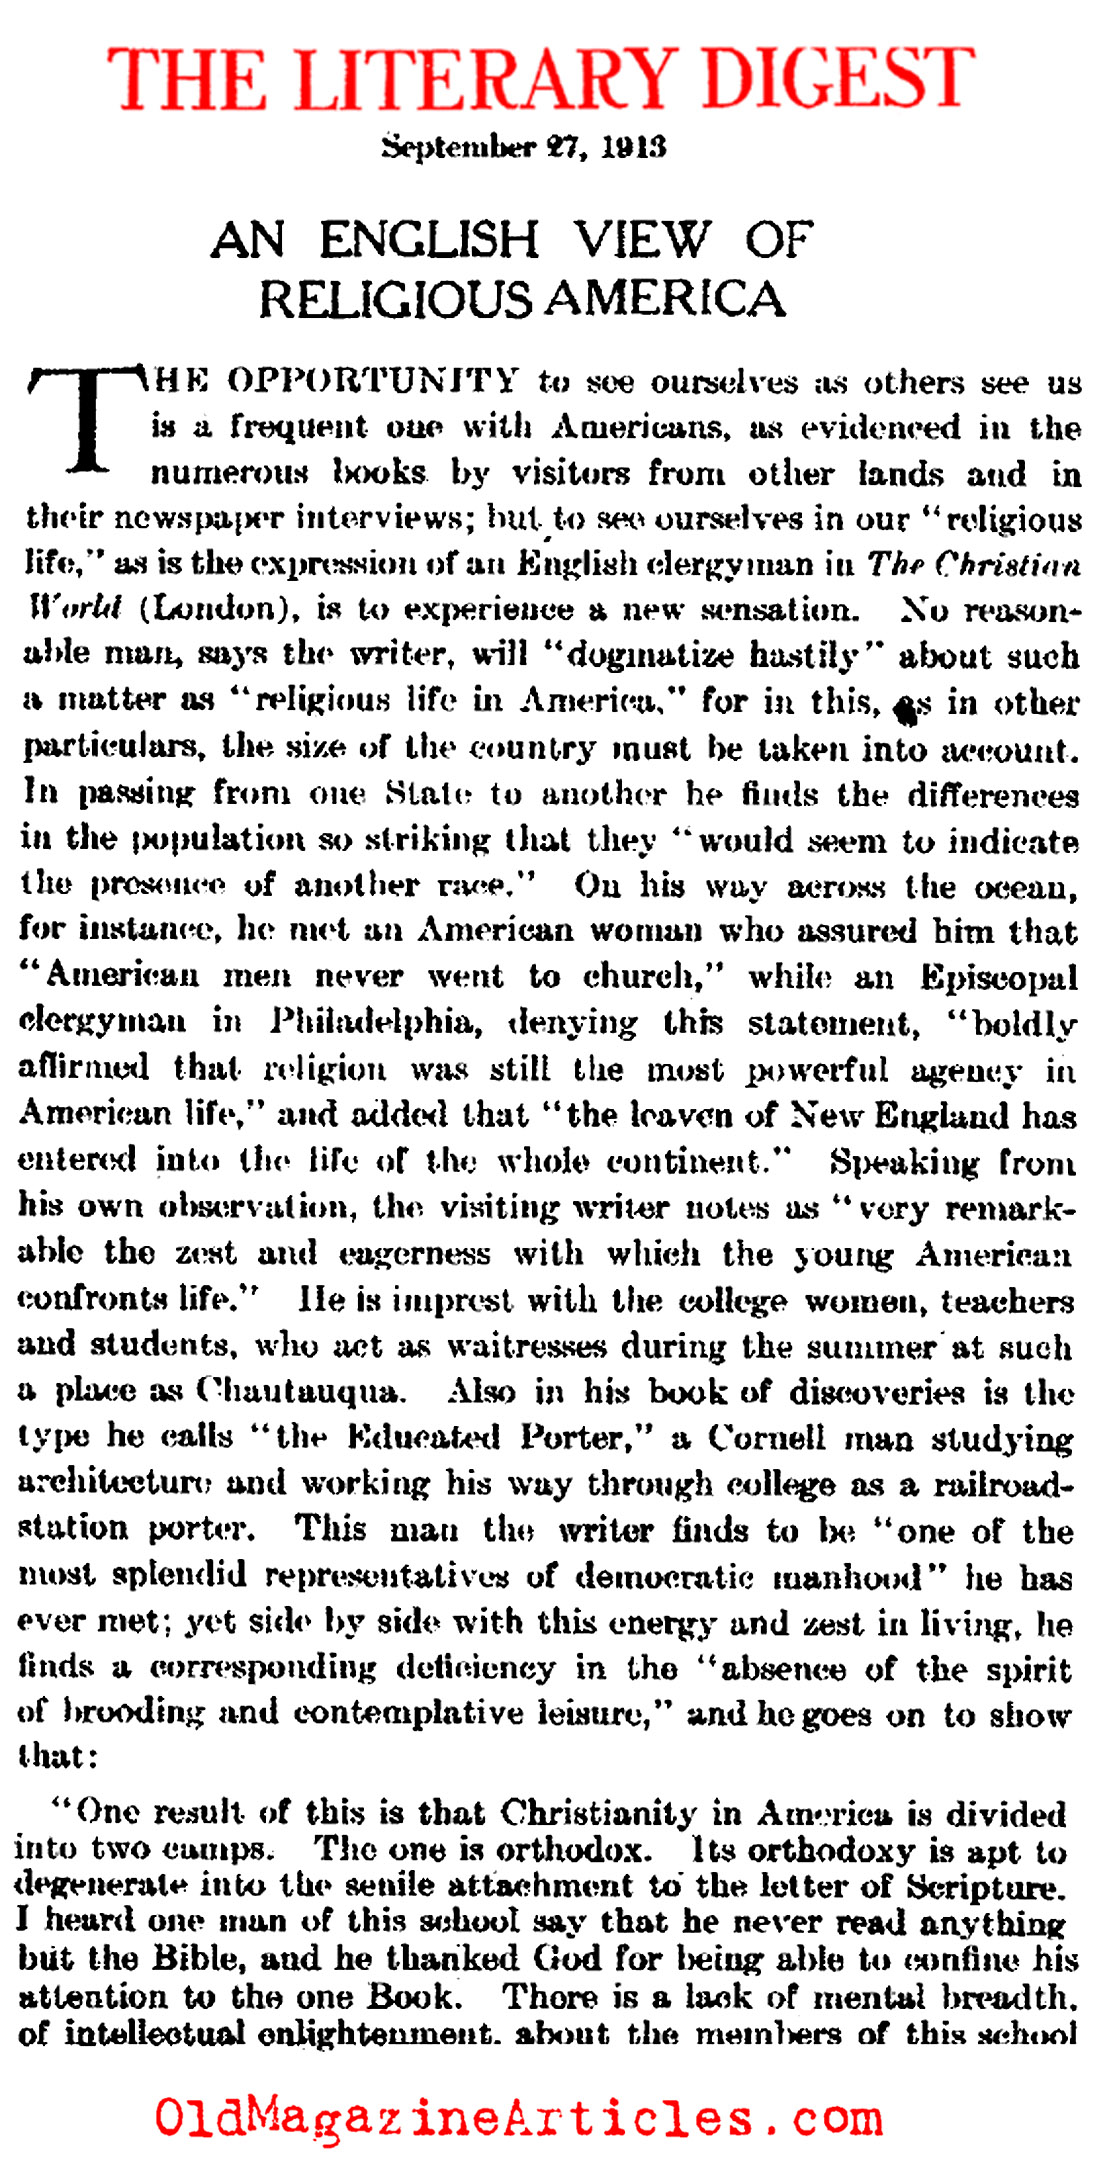 The British View of Religious America (Literary Digest, 1913)